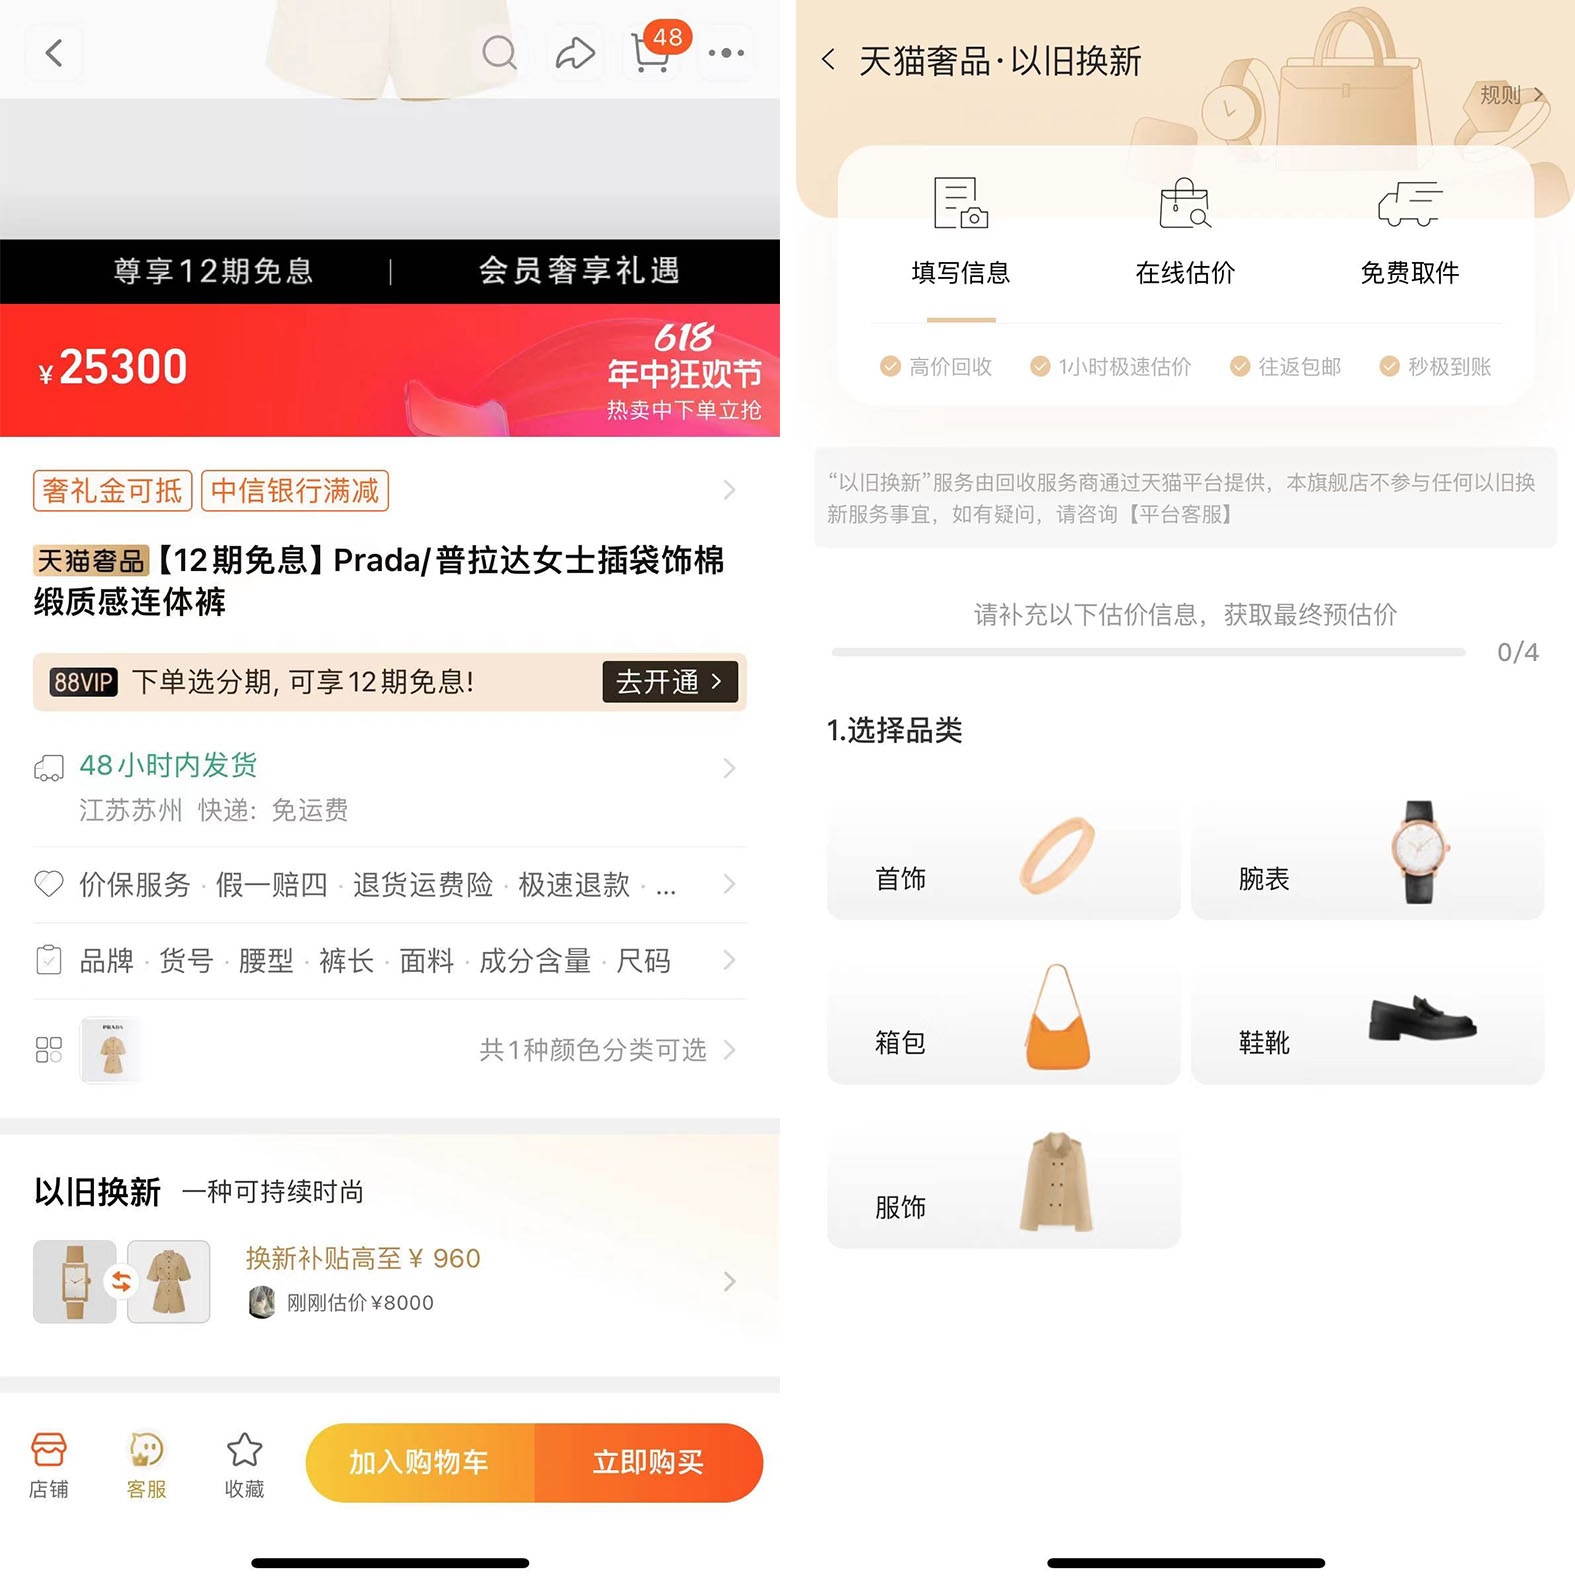 Tmall Luxury Pavilion now offers a trade-in service for lightly used luxury items. Image: Screenshot